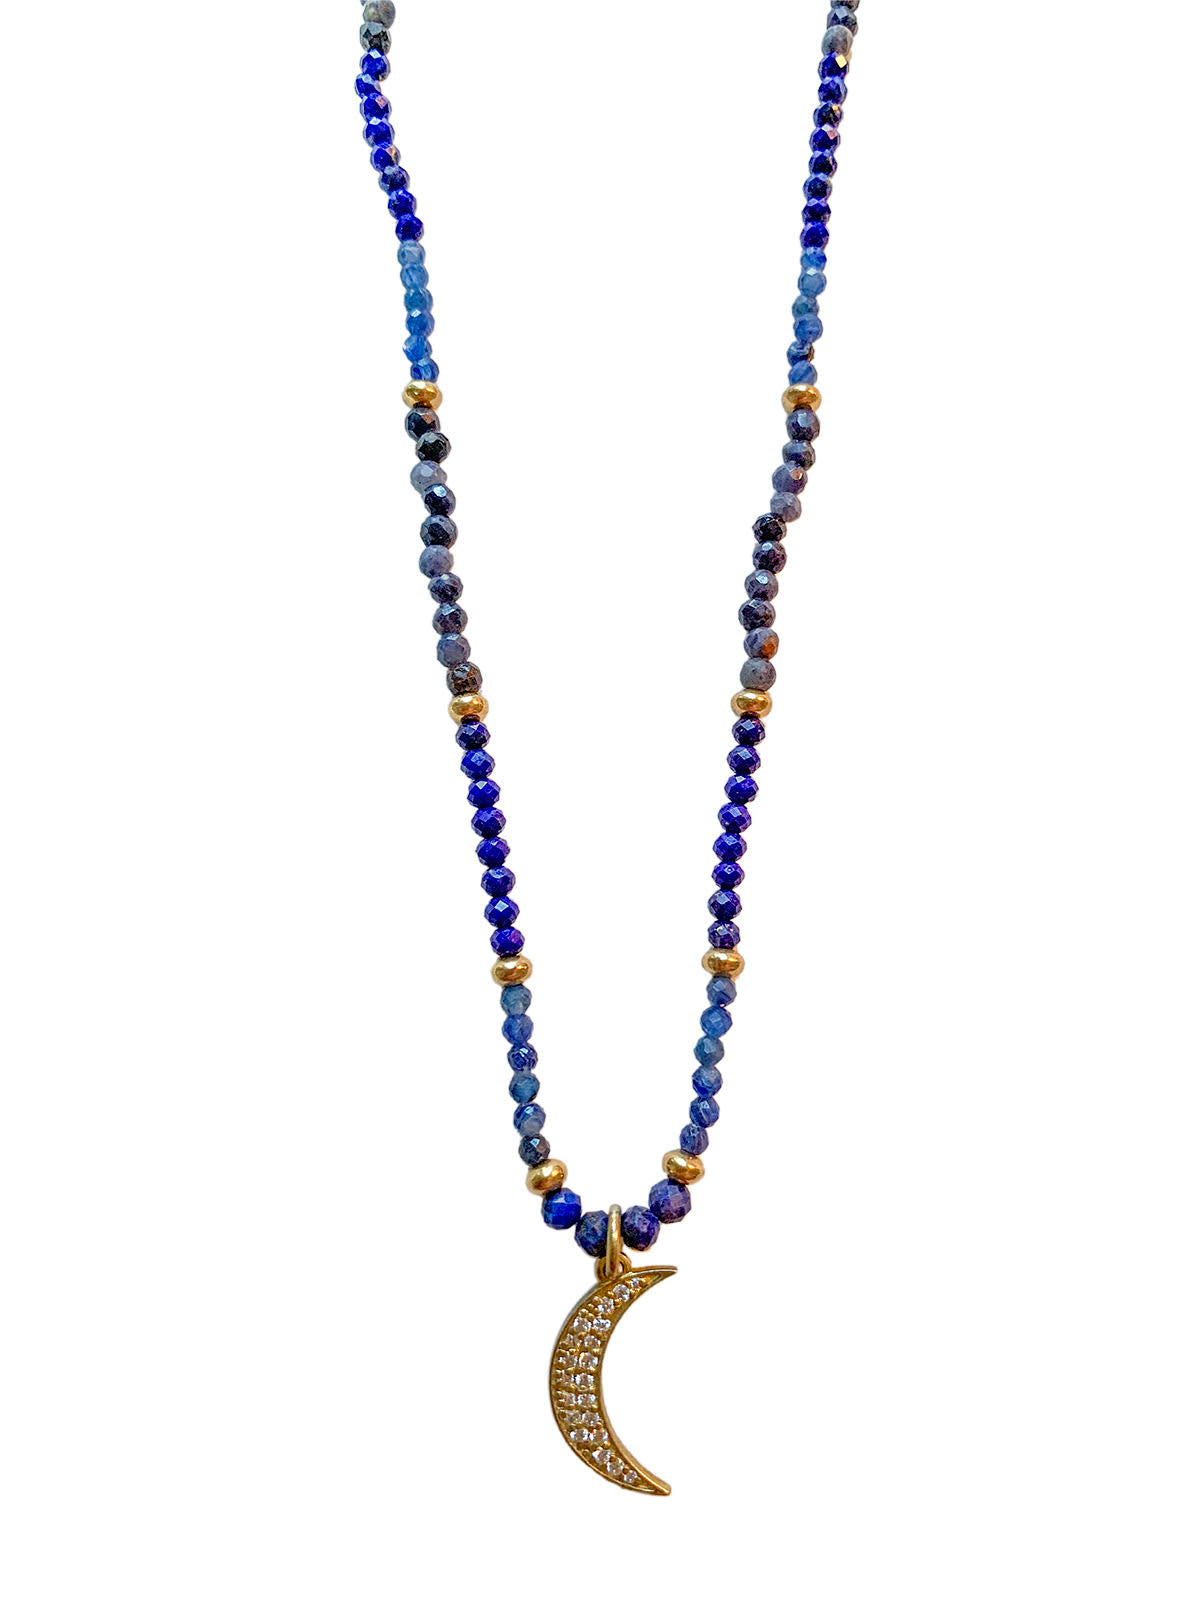 Crescent Moon in Lapis, Kyanite, and Iolite